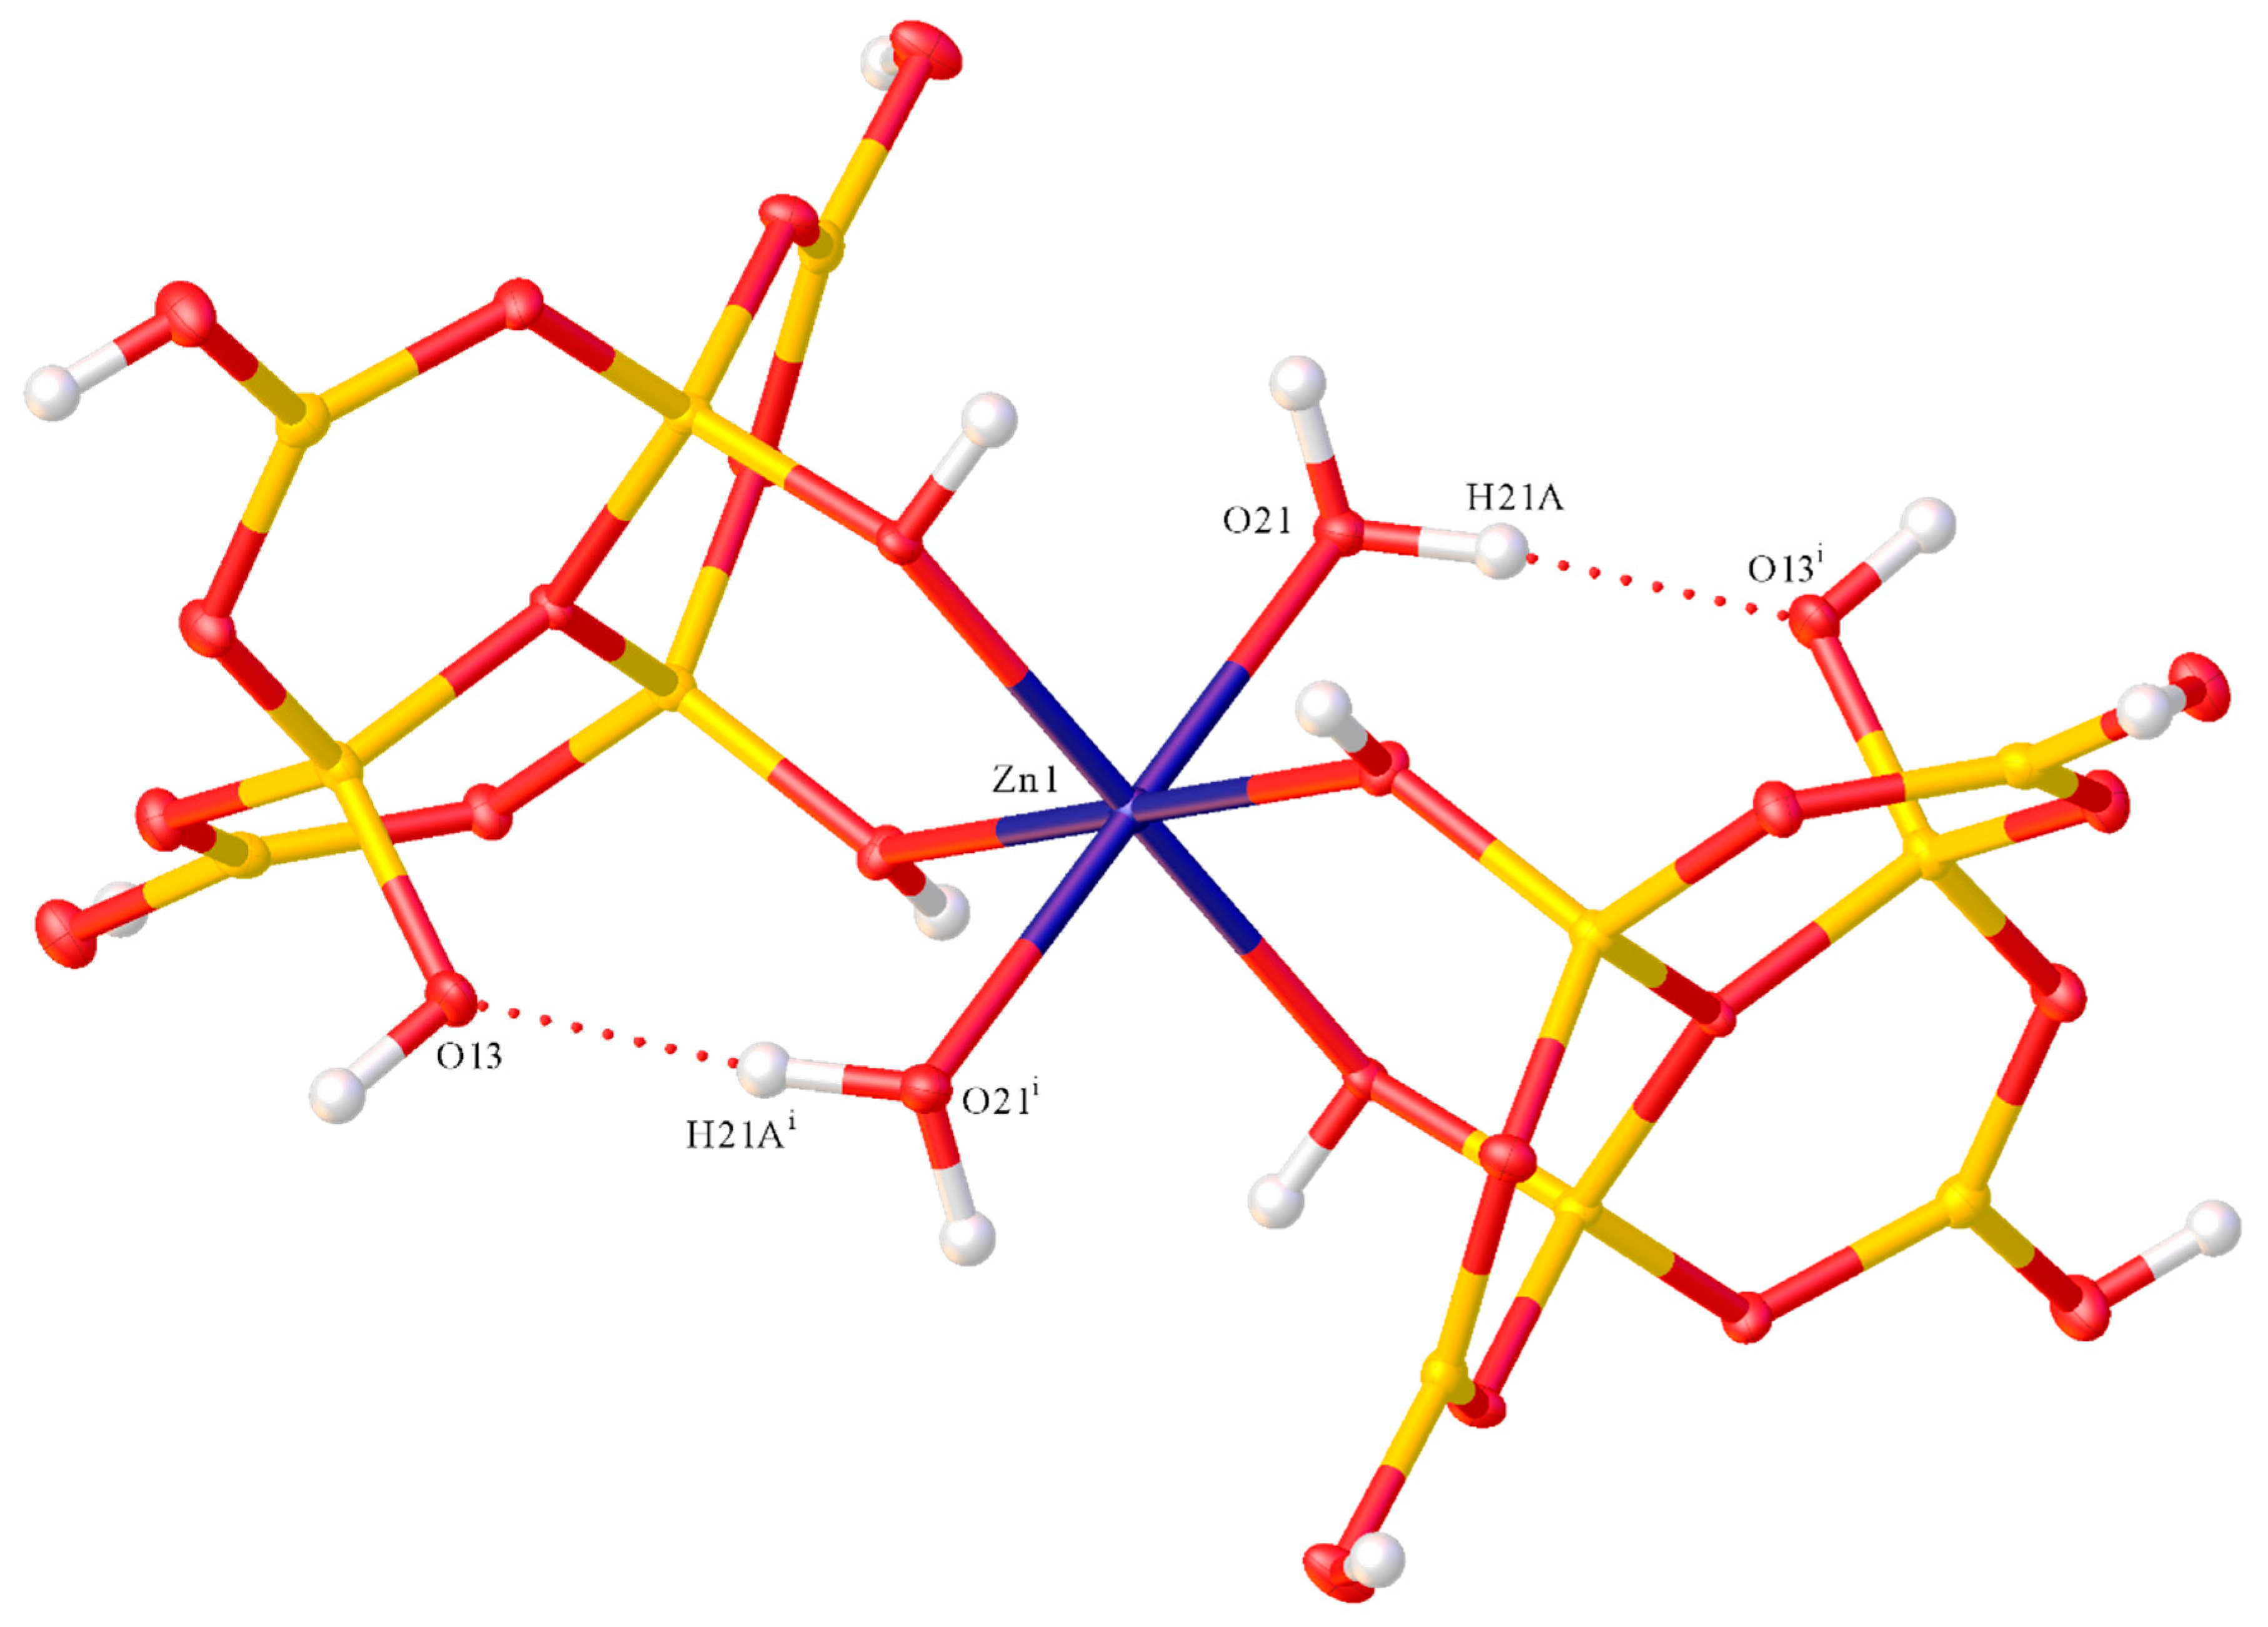 Inorganics Free Full Text Hexaborate 2 And Dodecaborate 6 Anions As Ligands To Zinc Ii Centres Self Assembly And Single Crystal Xrd Characterization Of Zn K3o B6o7 Oh 6 K3n Dien 0 5h2o Dien Nh Ch2 Ch2nh2 2 Nh4 2 Zn K2o B6o7 Oh 6 2